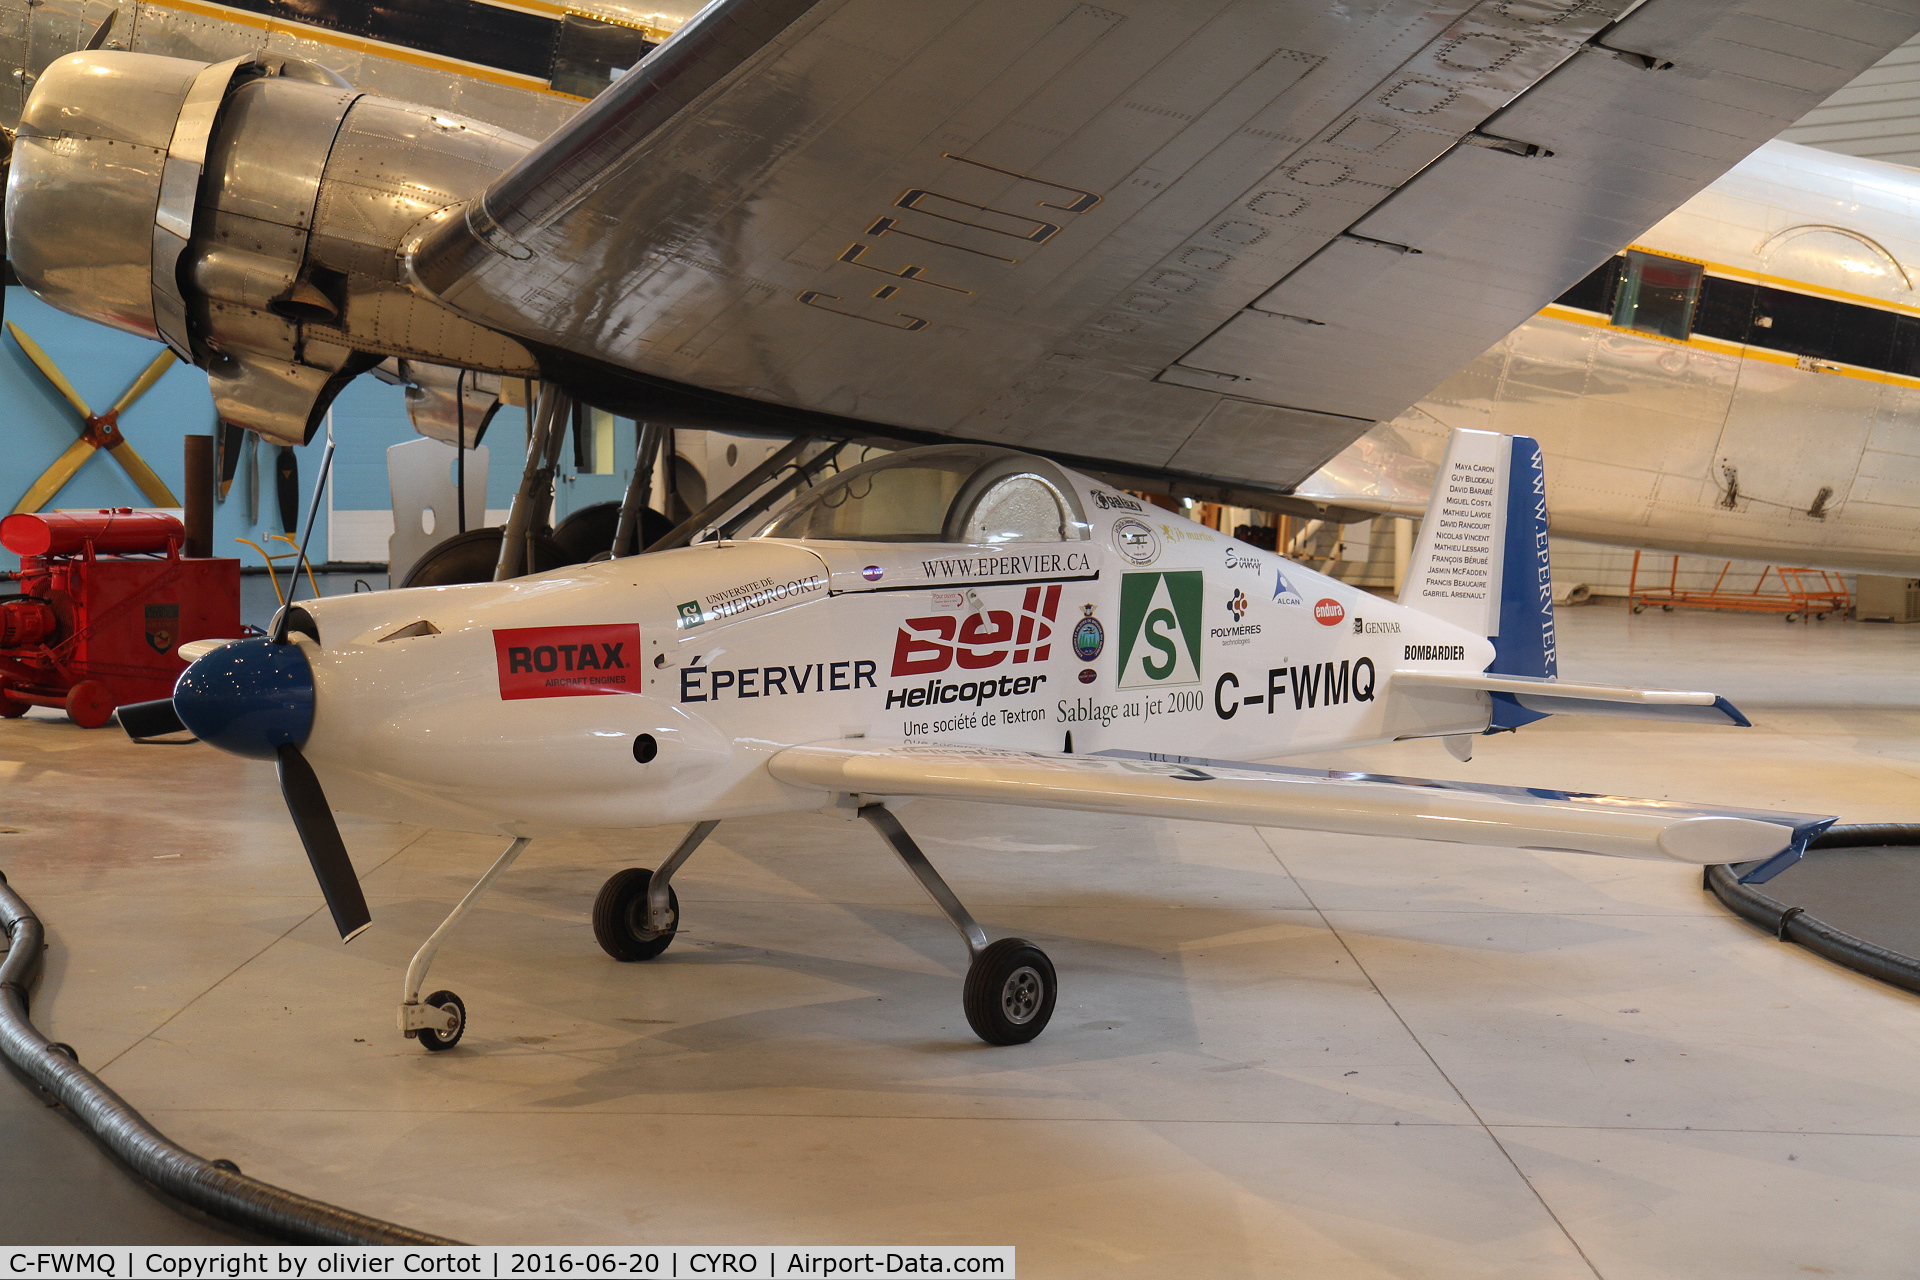 C-FWMQ, 2008 Epervier X1 C/N EP-01, now in a museum